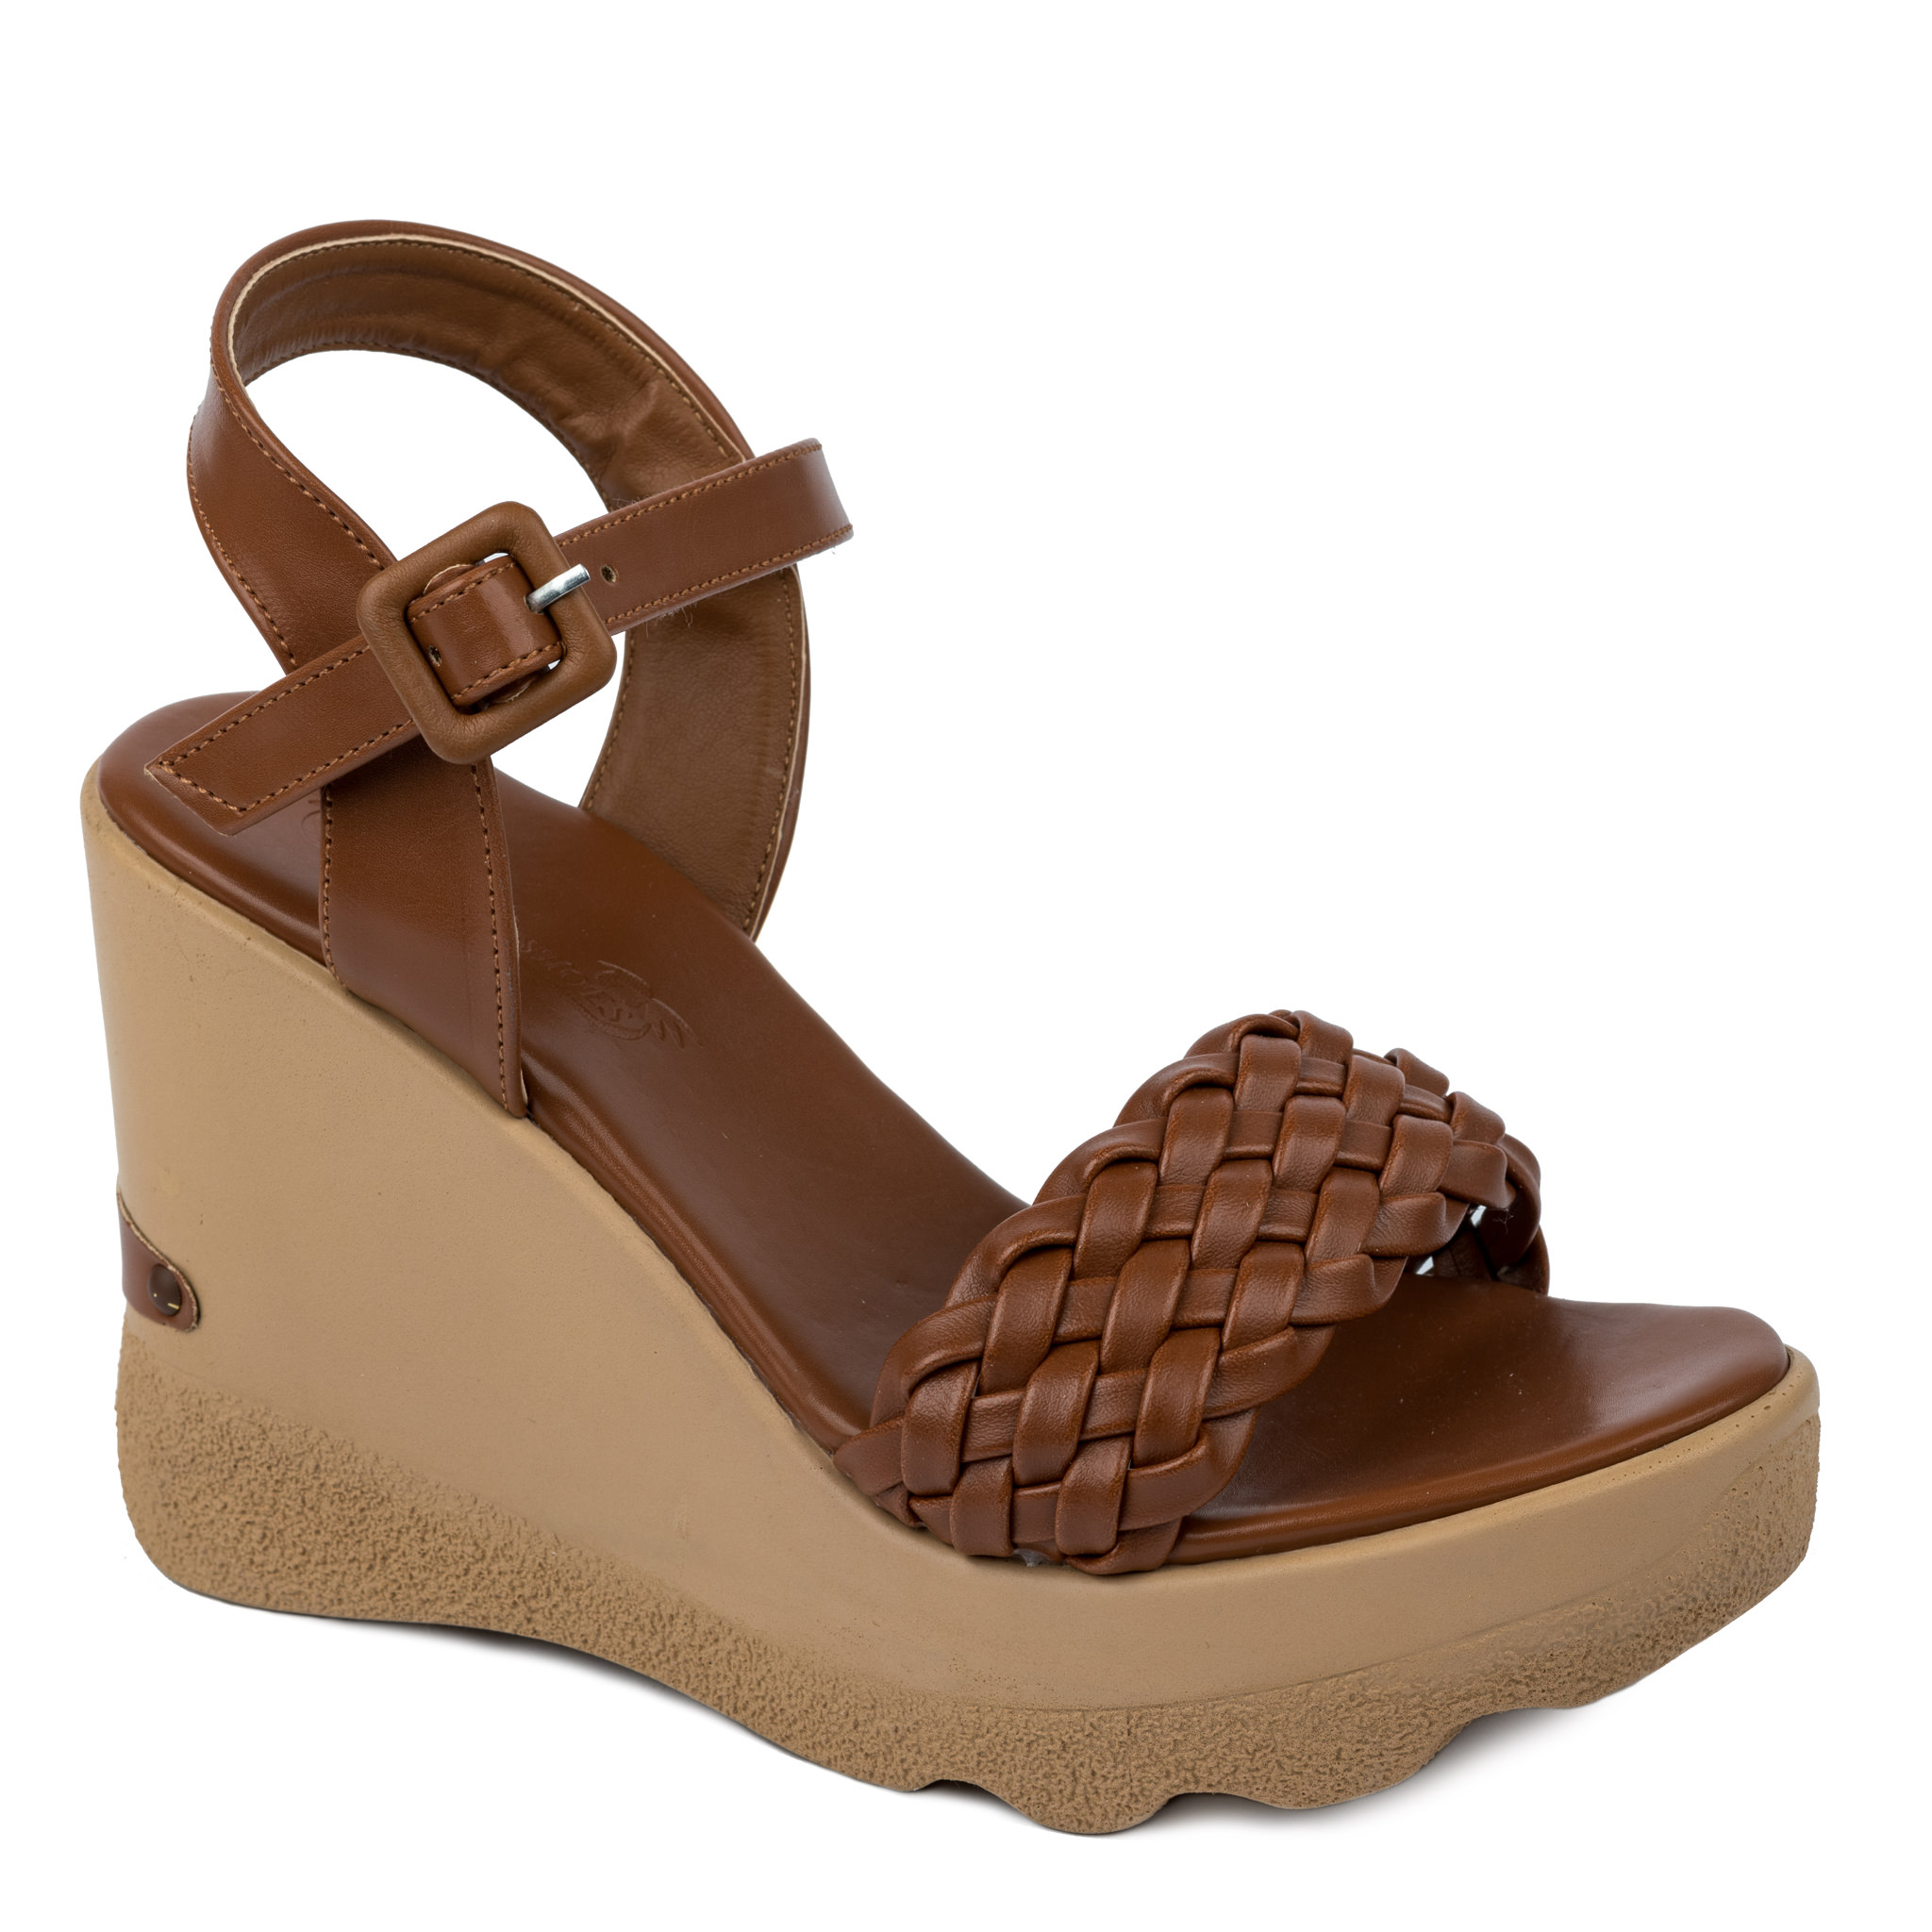 KNITTED WEDGE SANDALS - CAMEL